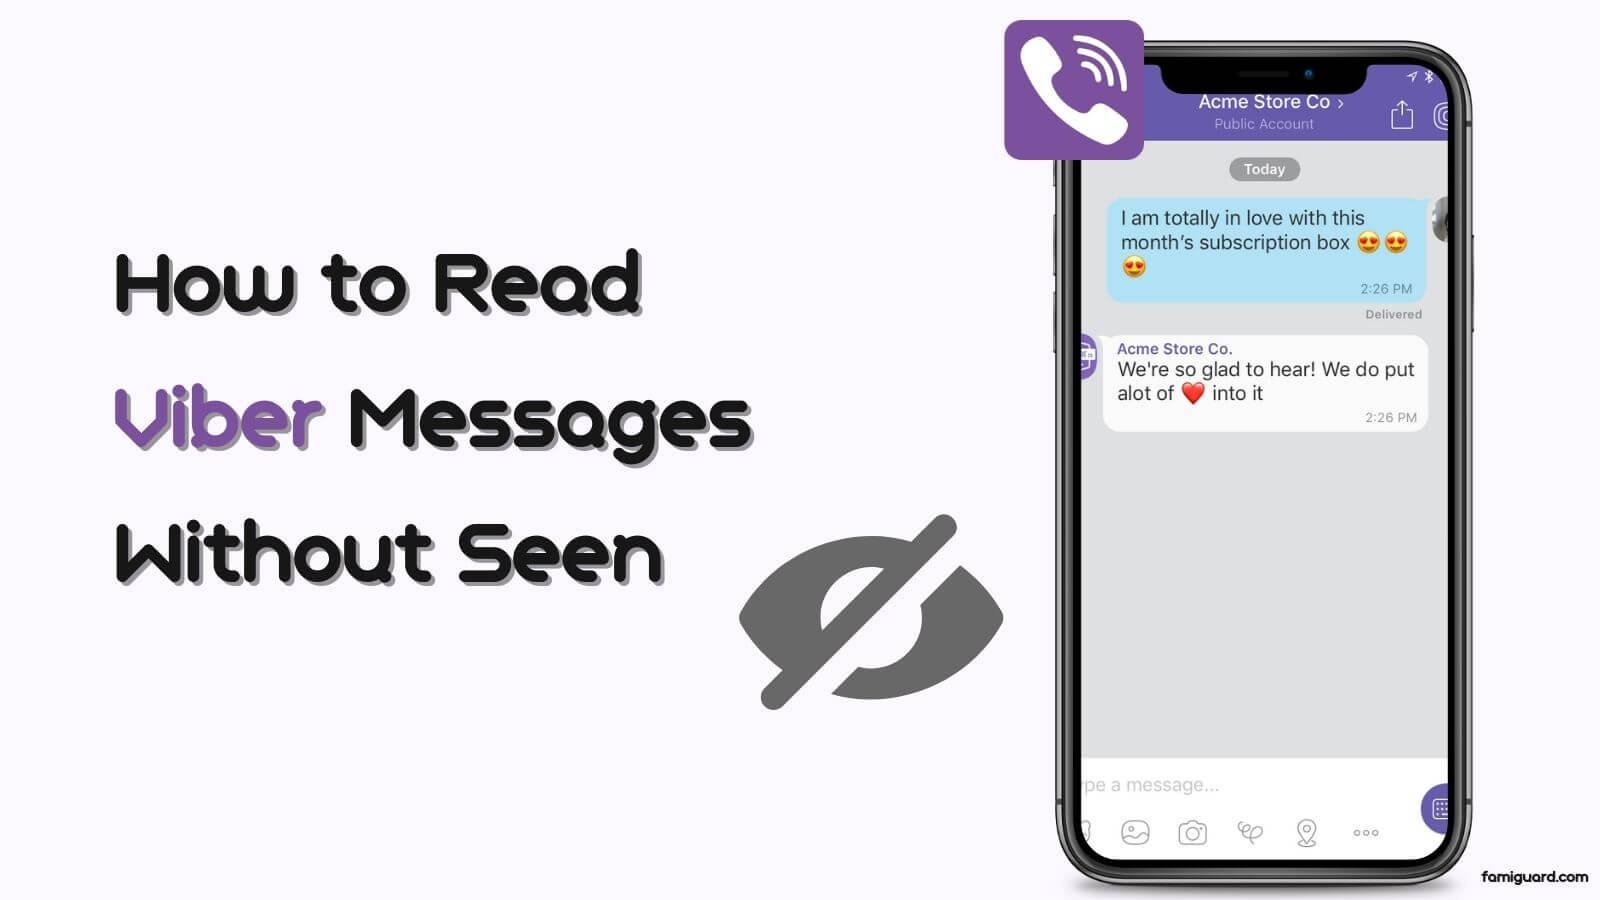 How to read Viber messages without seen